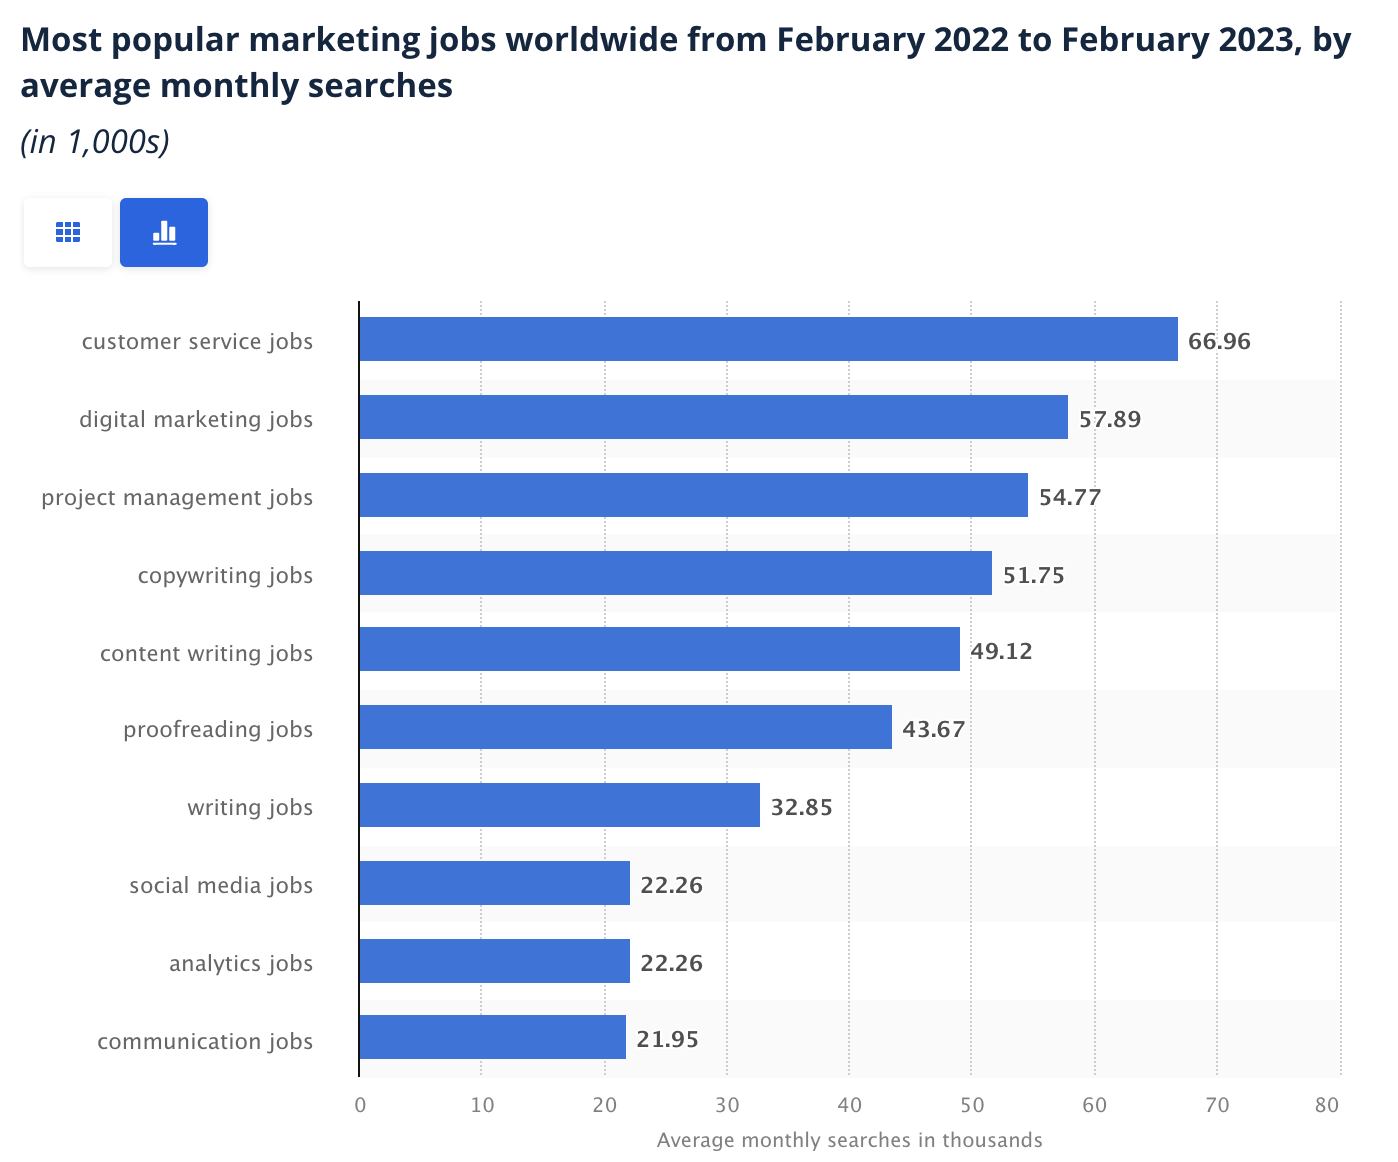 Popular marketing jobs based on worldwide searches between February 2022 and February 2023

The graph shows proofreading jobs account for around 43,670 job searches within this period and bracket.